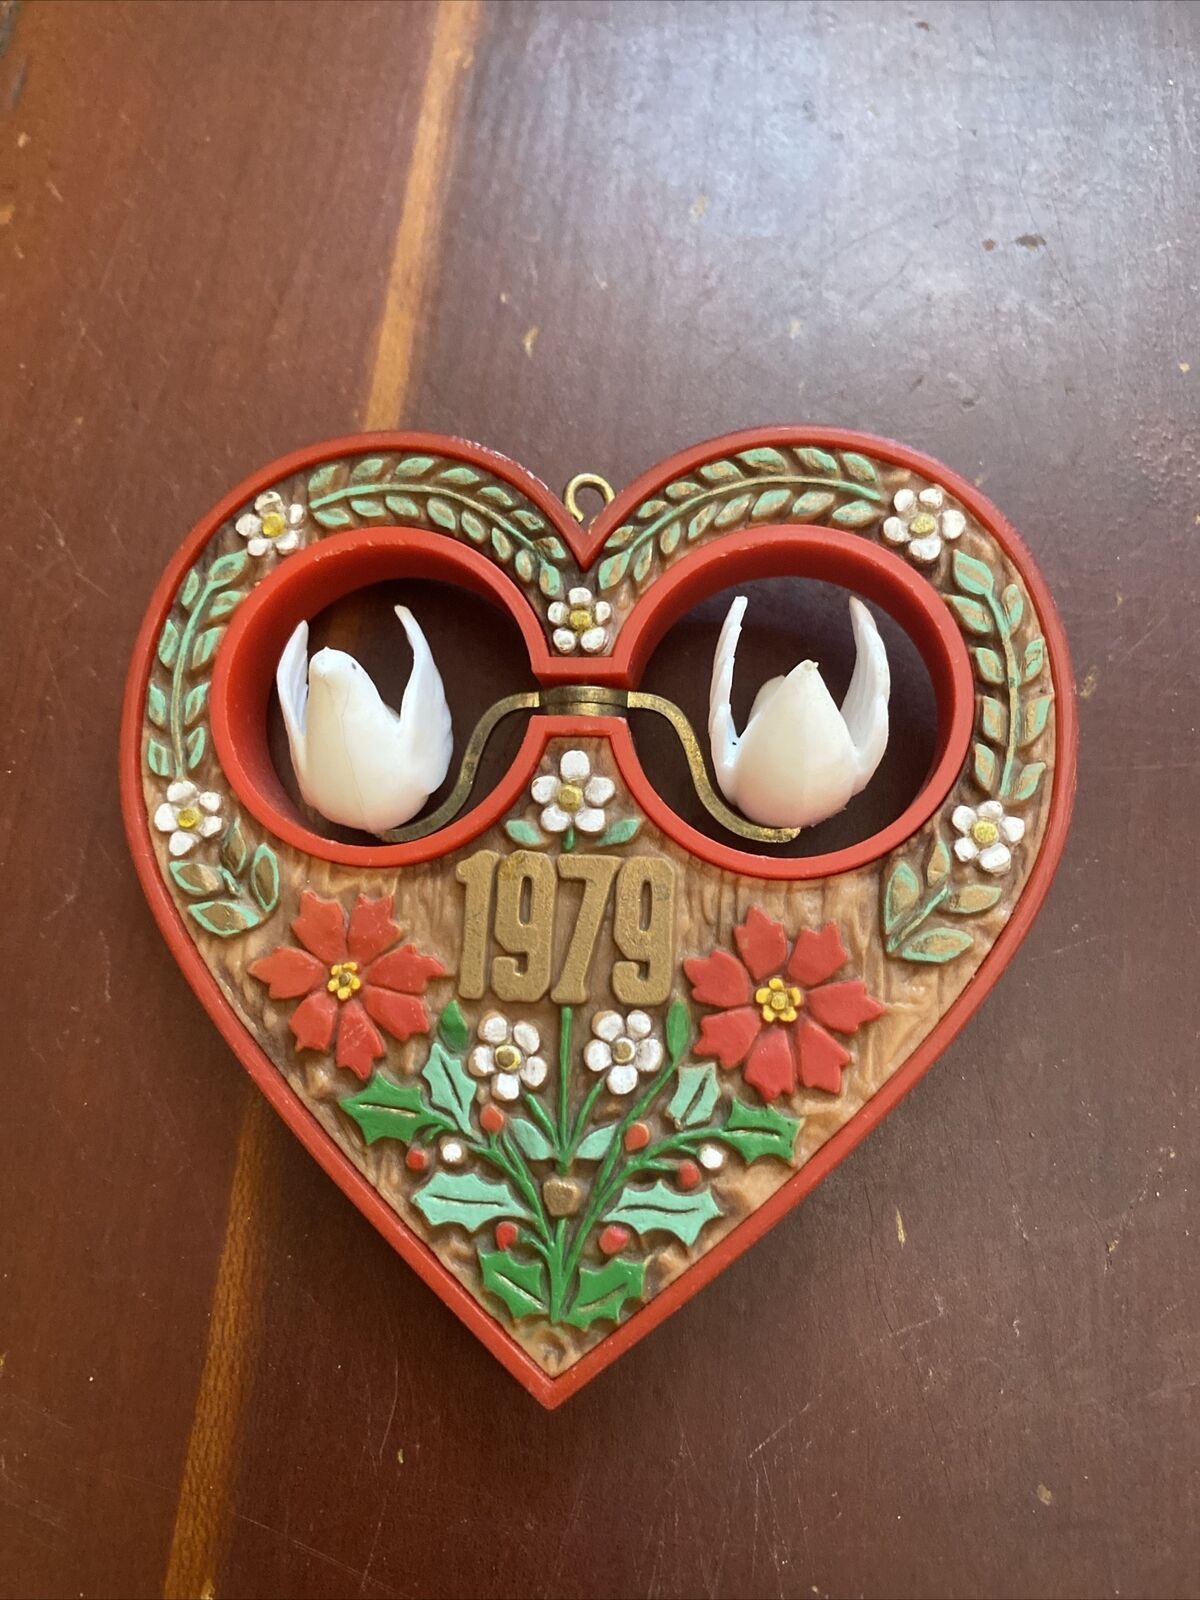 Vintage Hallmark 1979 Christmas Ornament Heart Dove Twirl-About Red Green White